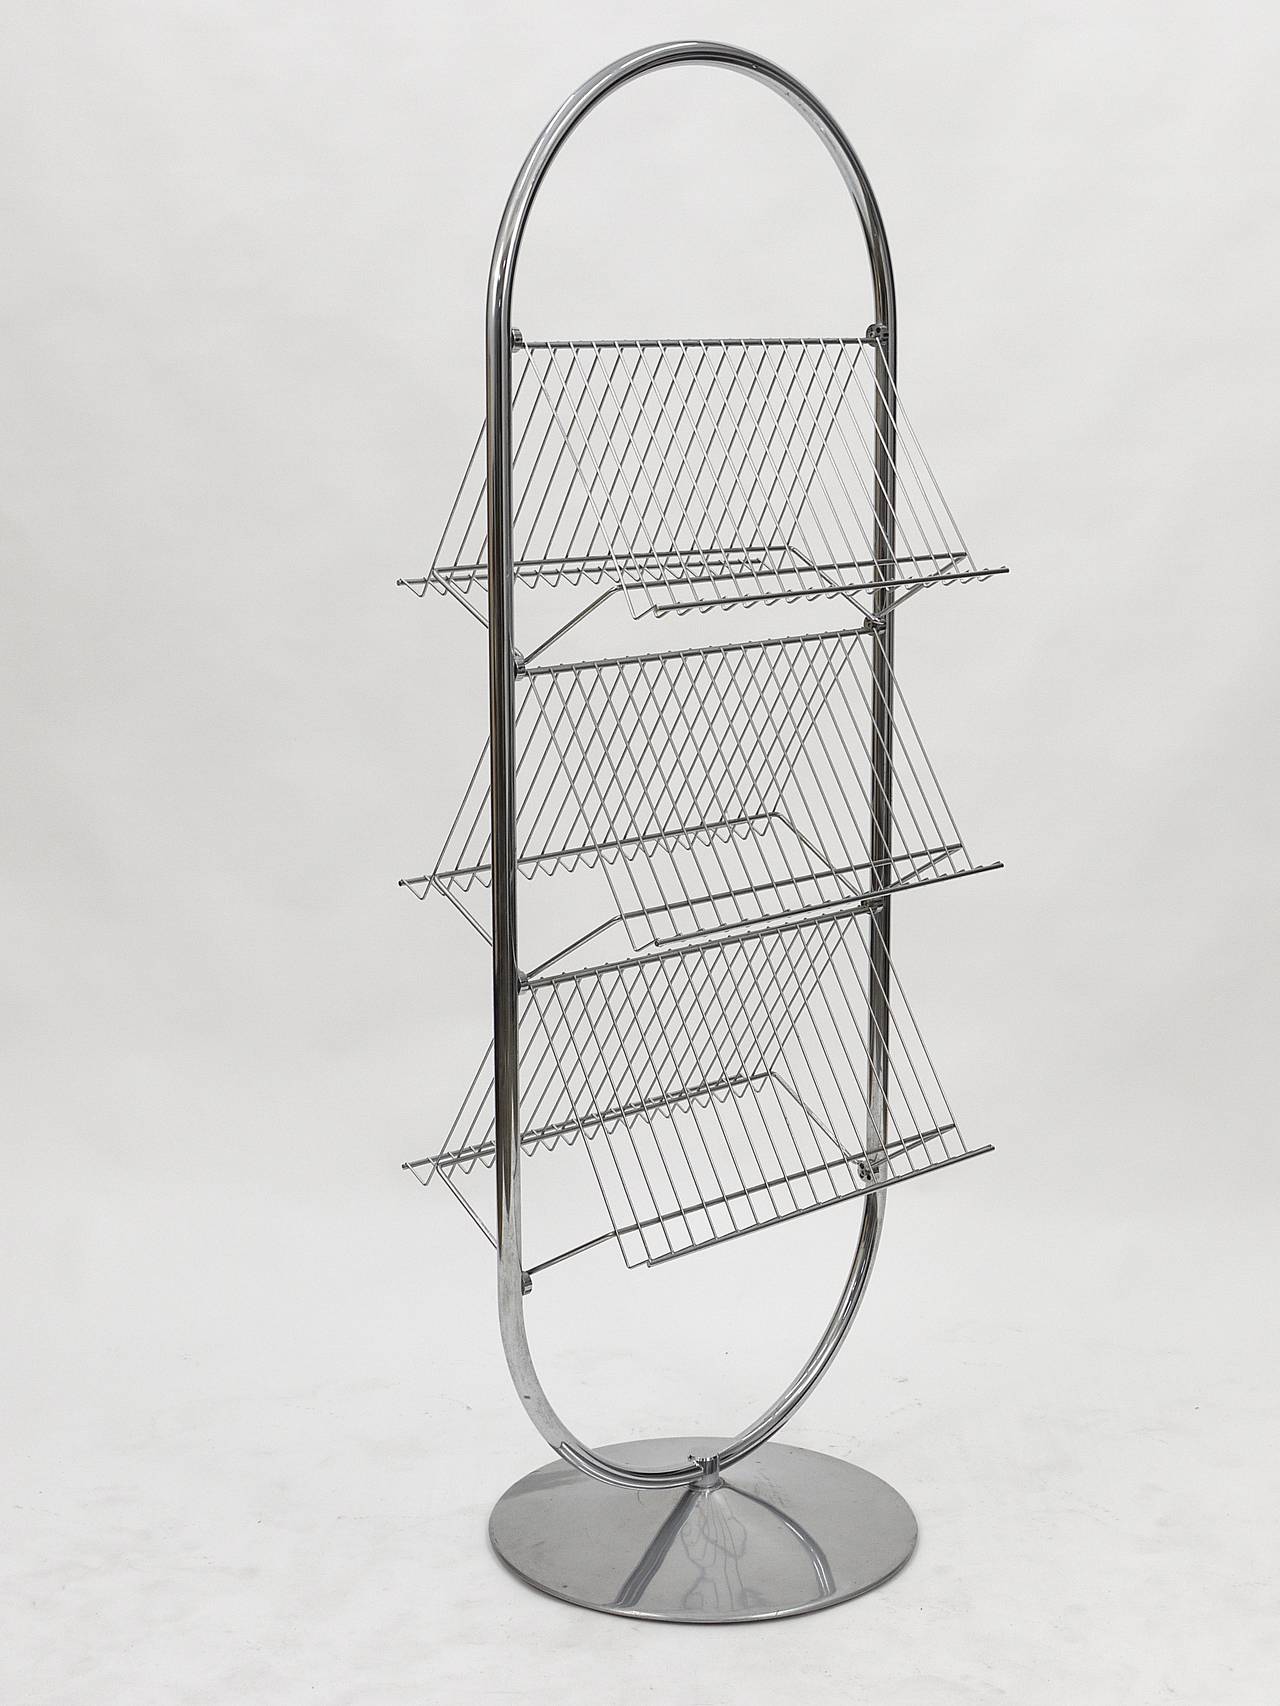 A chrome-plated VP-rack display stand with 6 shelves, designed in 1973 by Verner Panton, executed in the 1990s by Fritz Hansen, Denmark (discontinued). To use as a display rack oder magazine rack. In very good condition with marginal patina.